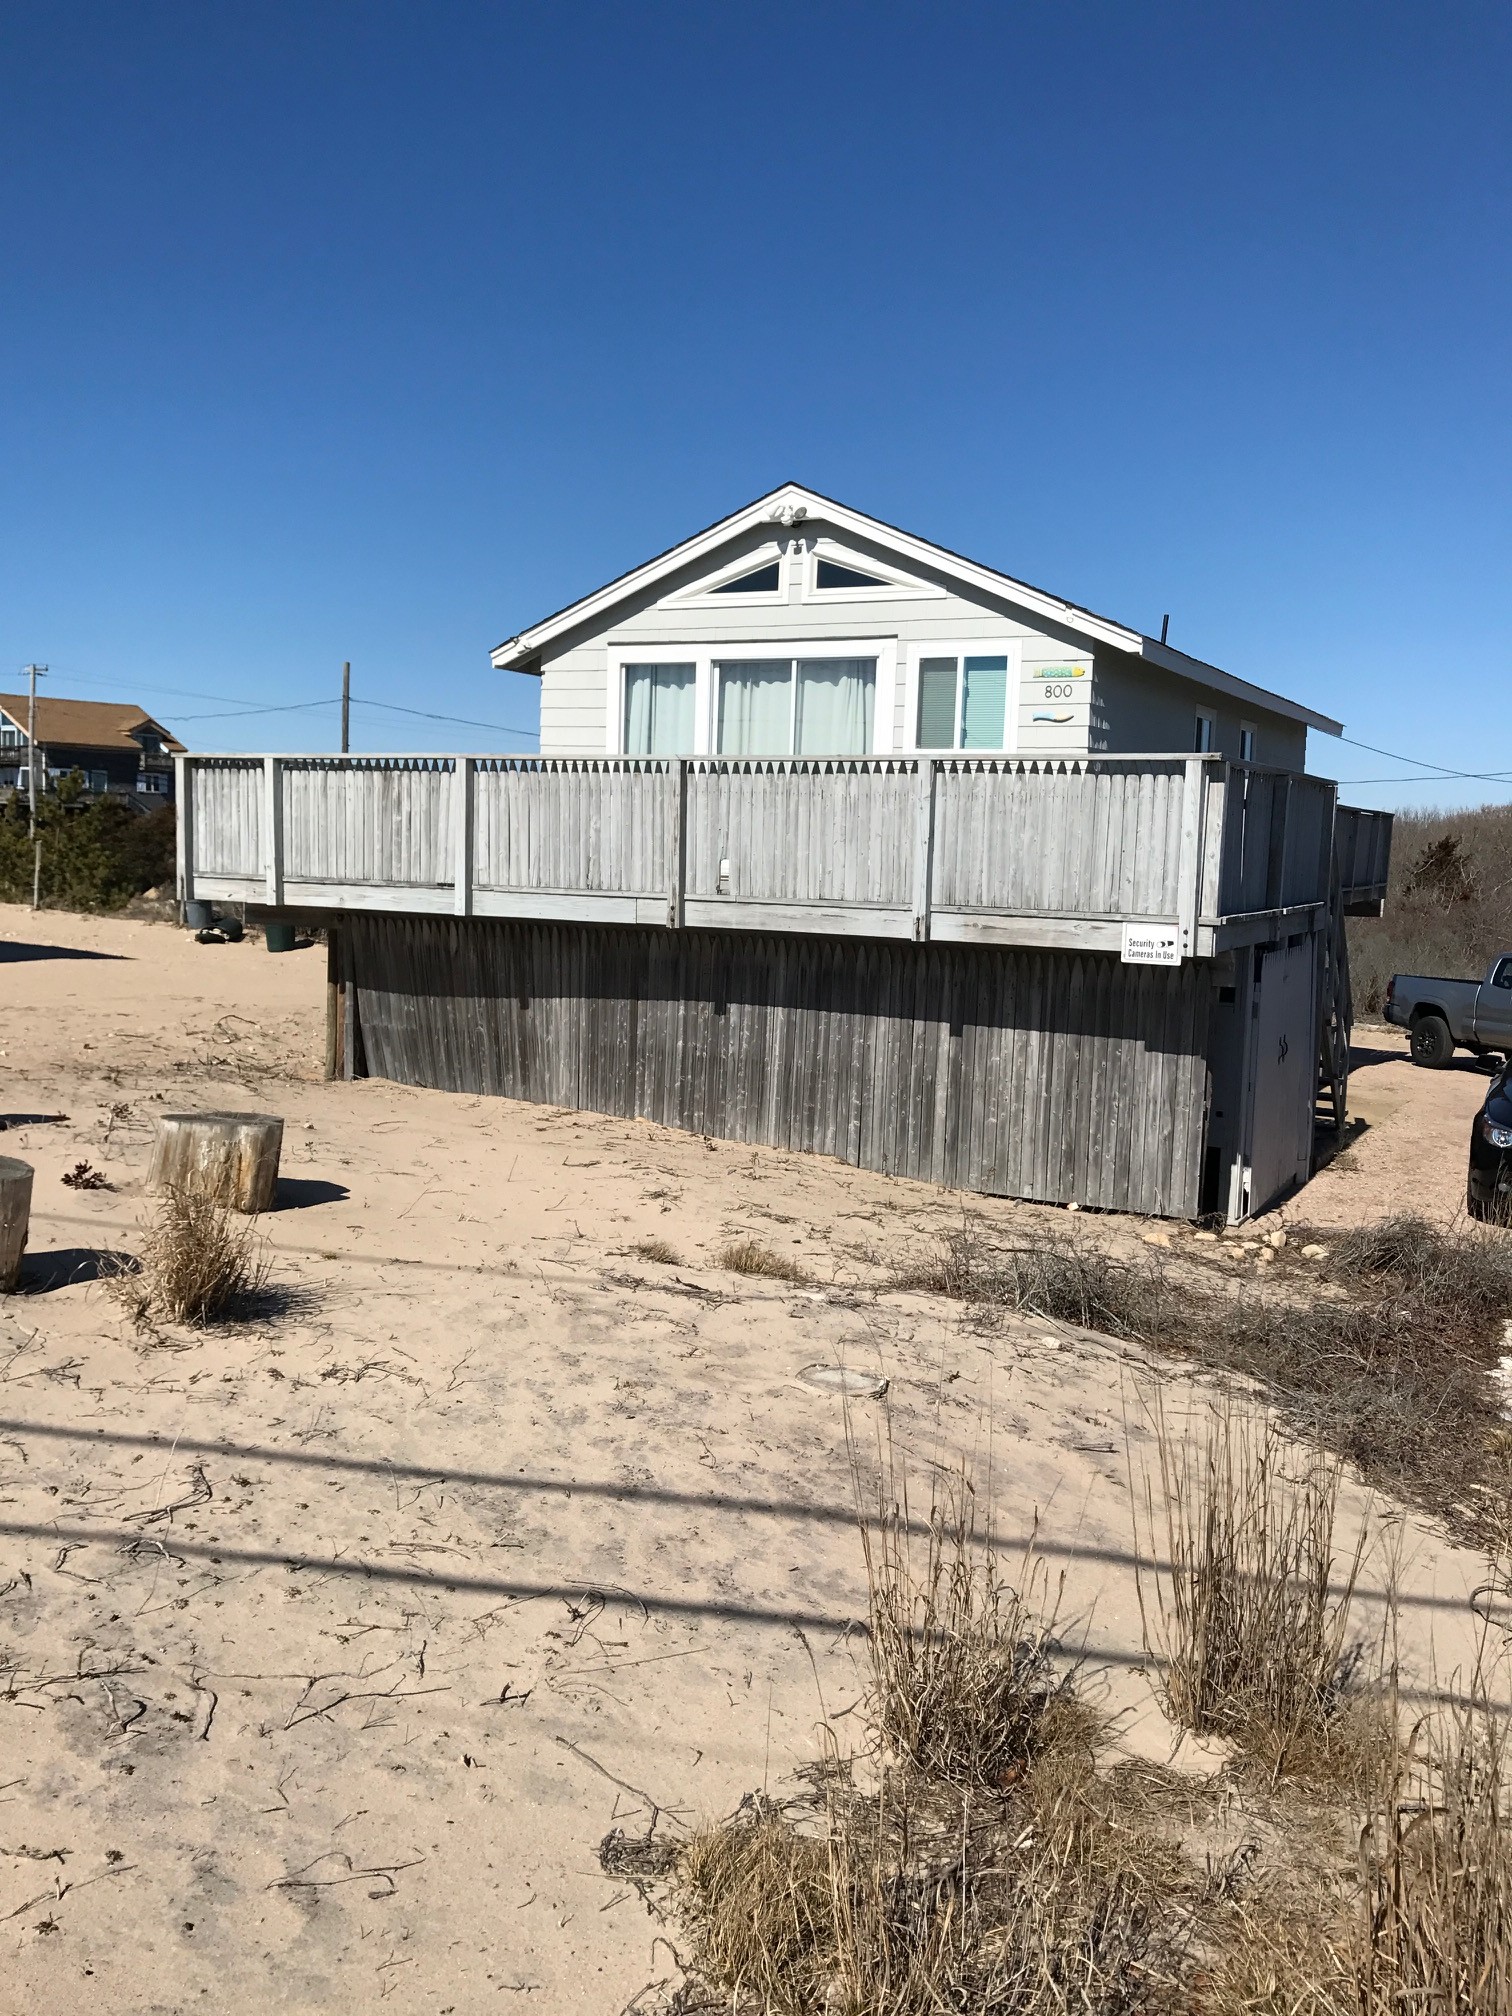 PESCE – across from the beach – Adorable 2 bedroom cottage